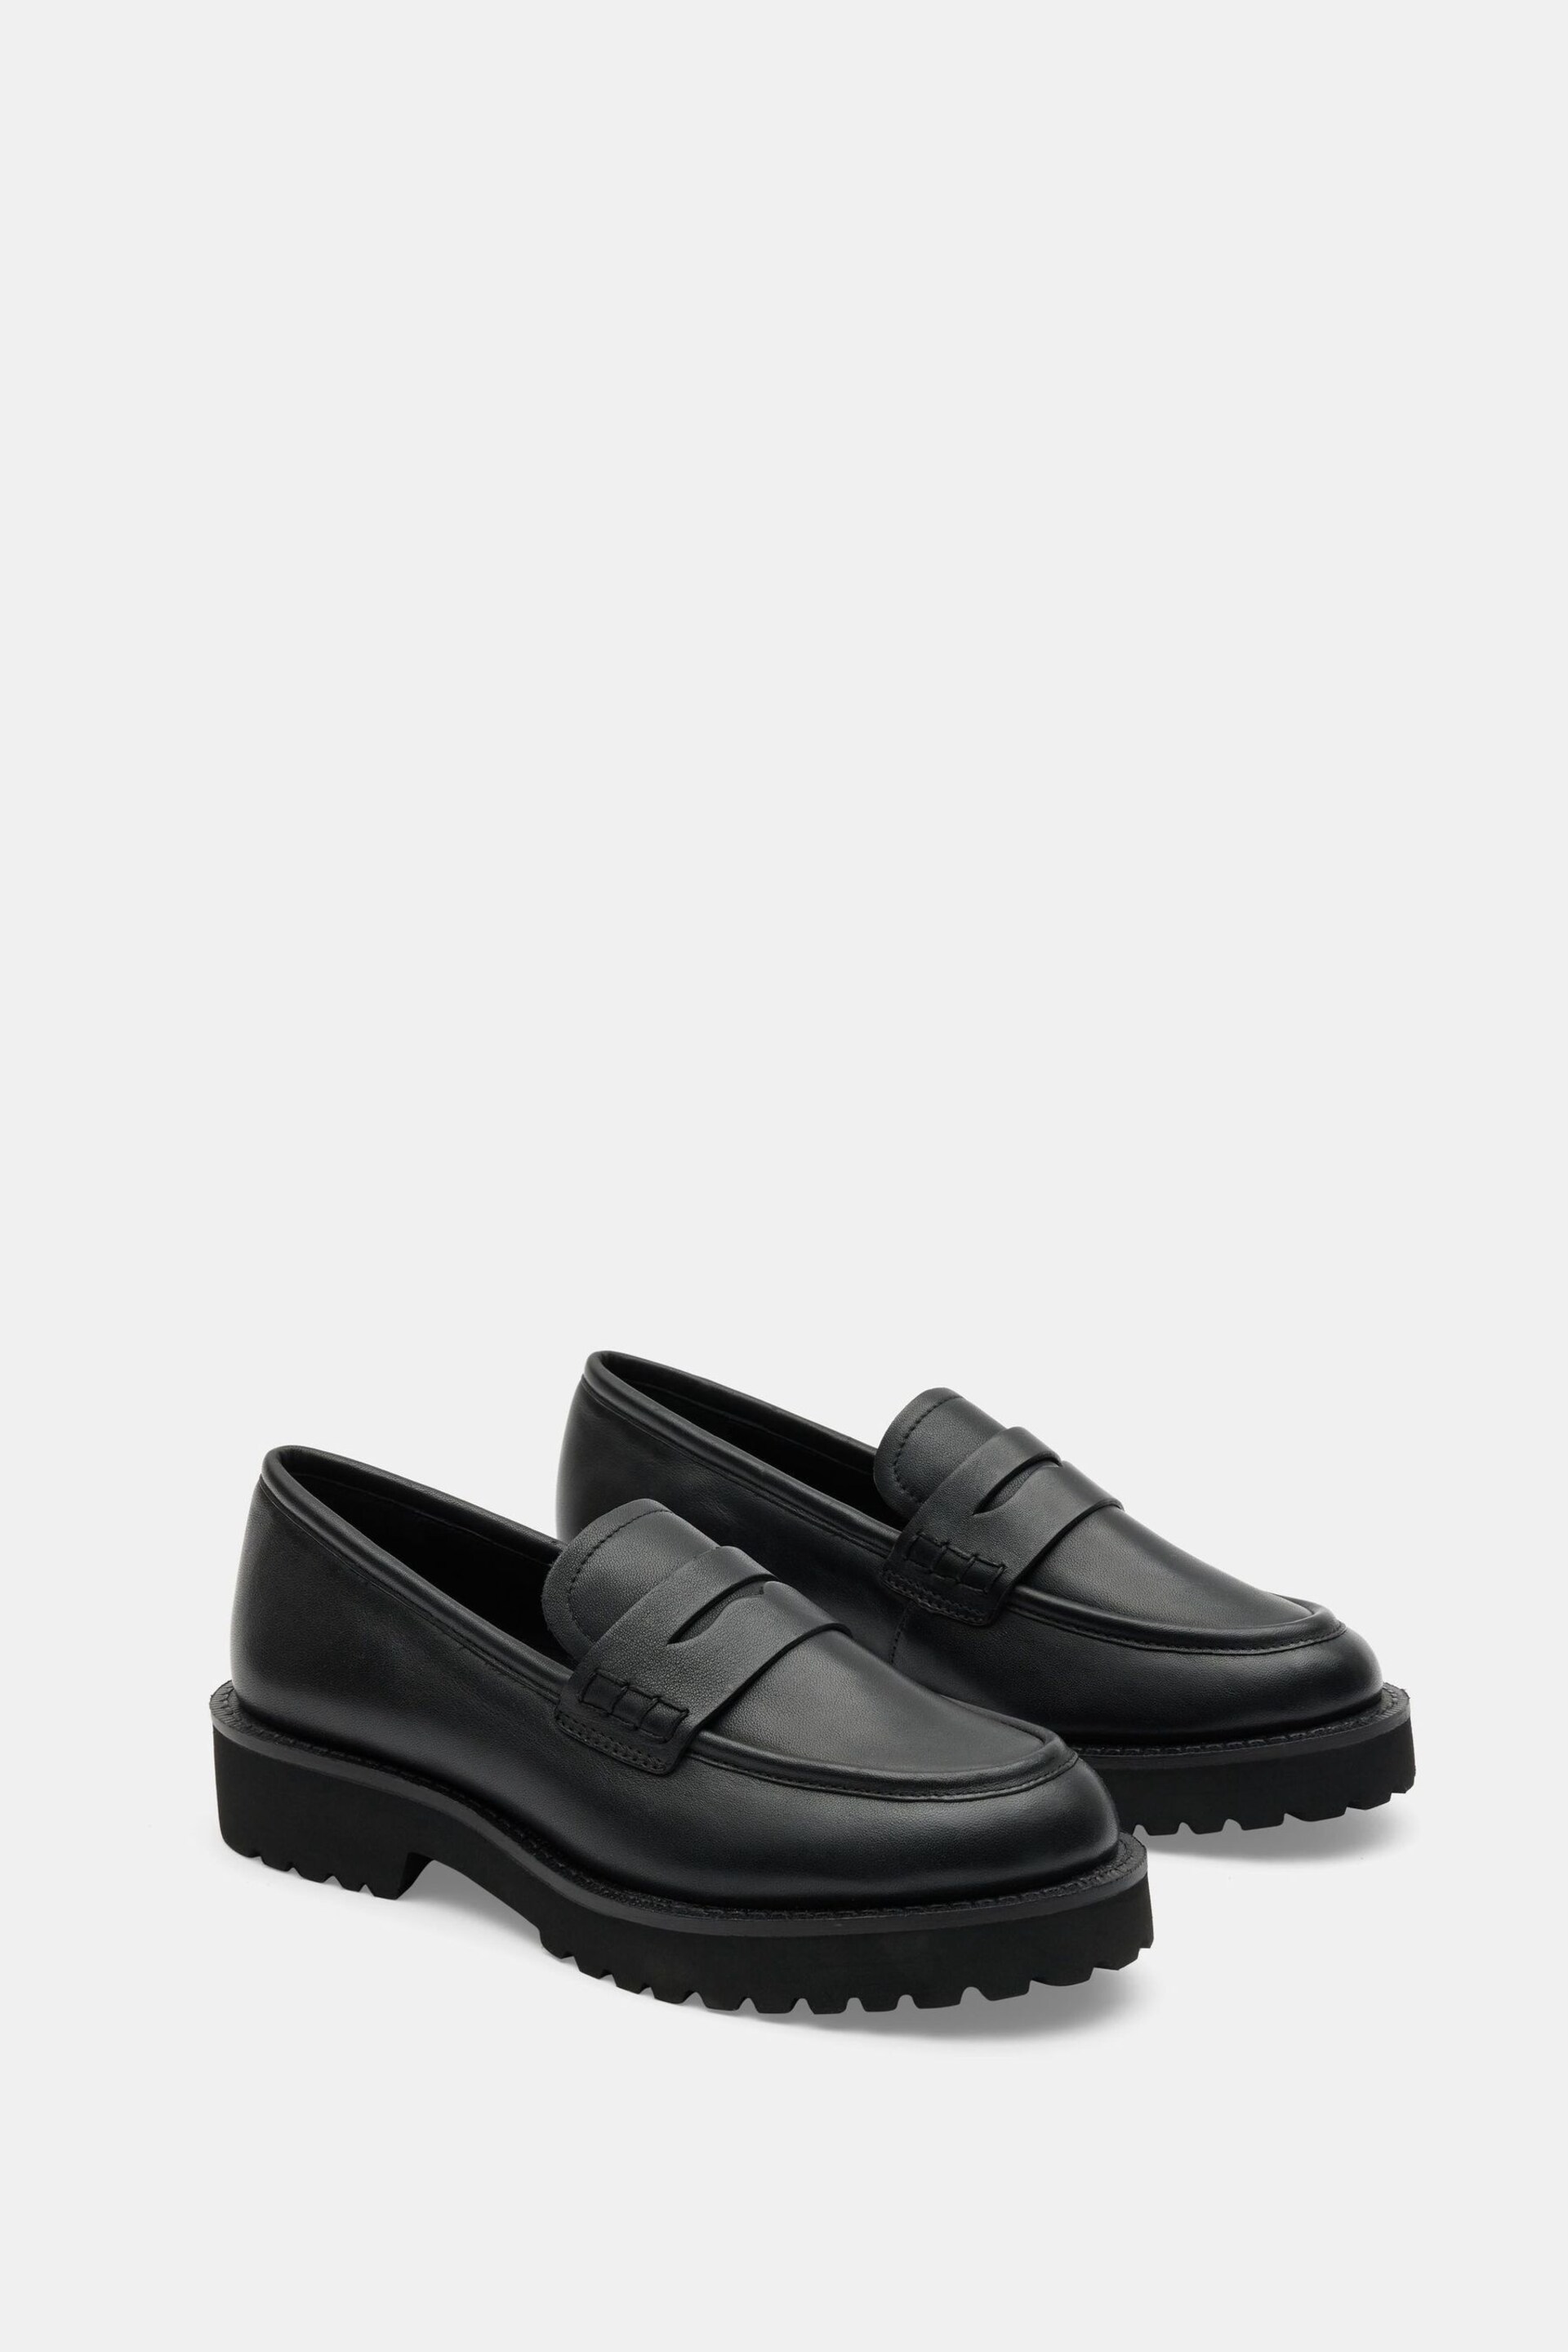 Hush Black Blake Cleated Leather Loafers - Image 2 of 4